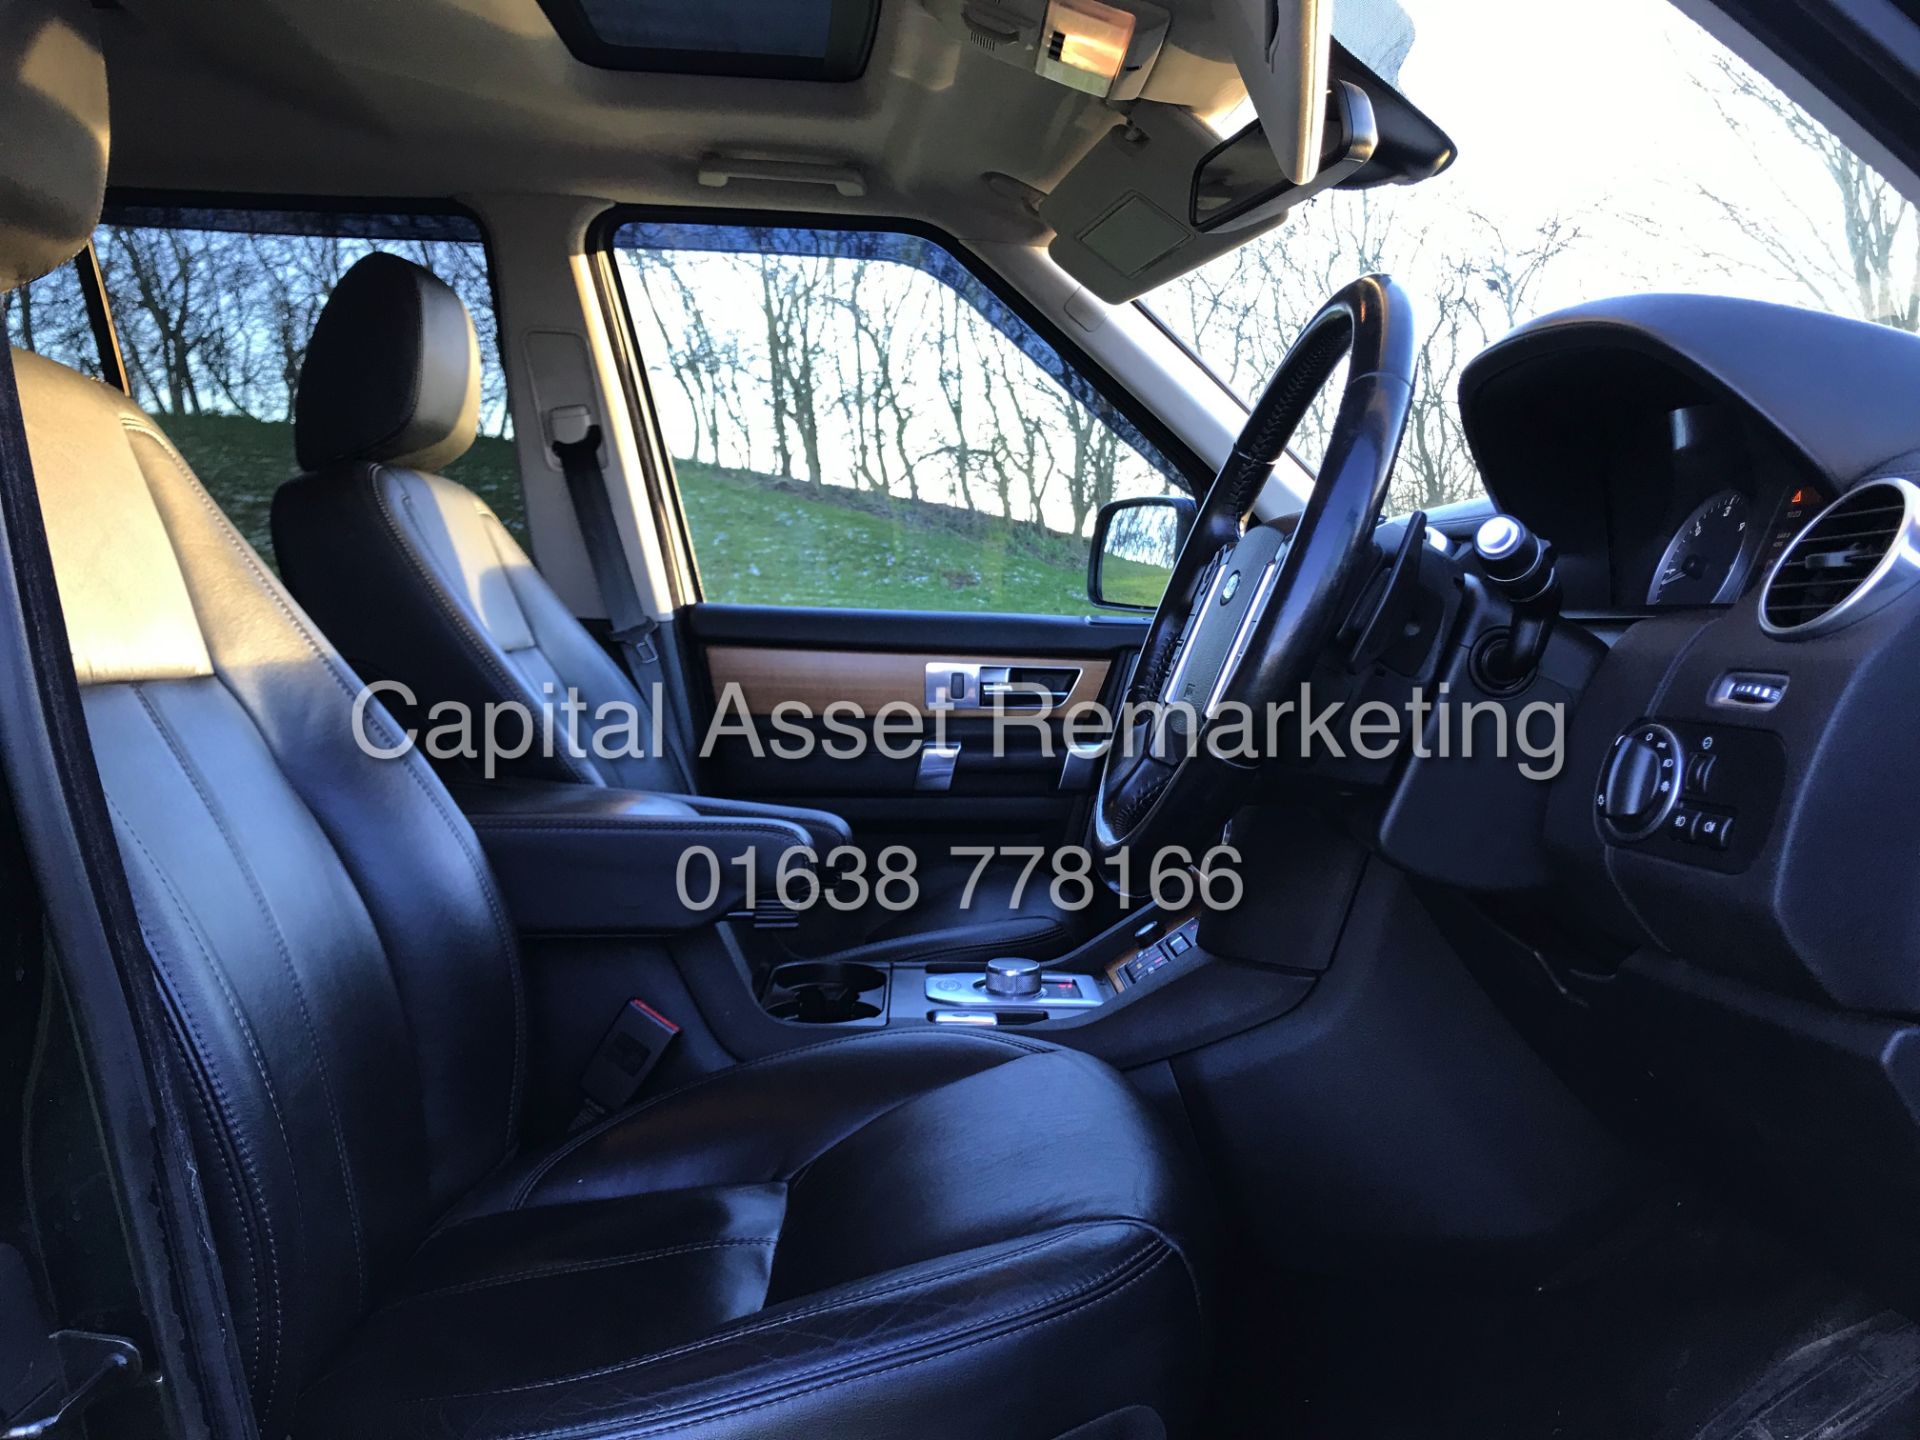 LAND ROVER DISCOVERY 4 "HSE" 3.0 SDV6 AUTOMATIC (13 REG) 7 SEATER **TOP OF THE RANGE** FULLY LOADED - Image 8 of 31